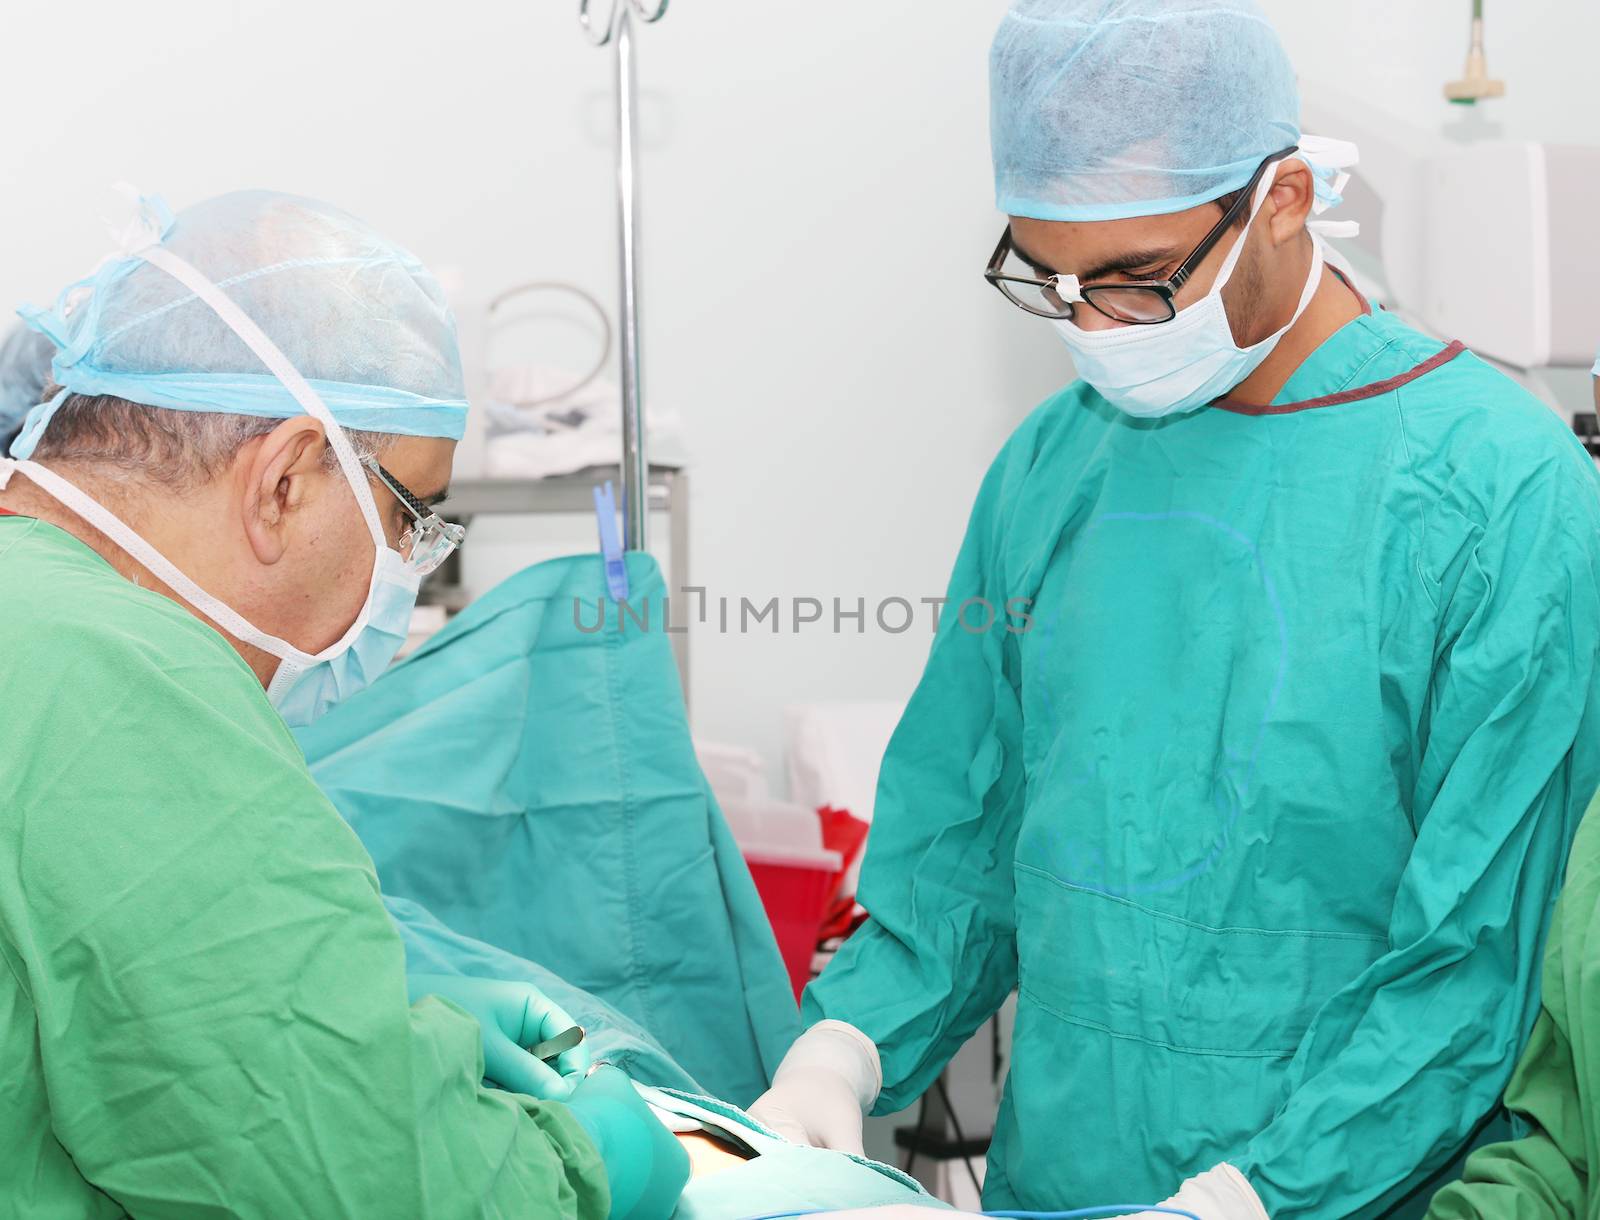 Surgeons working in operation room by dacasdo